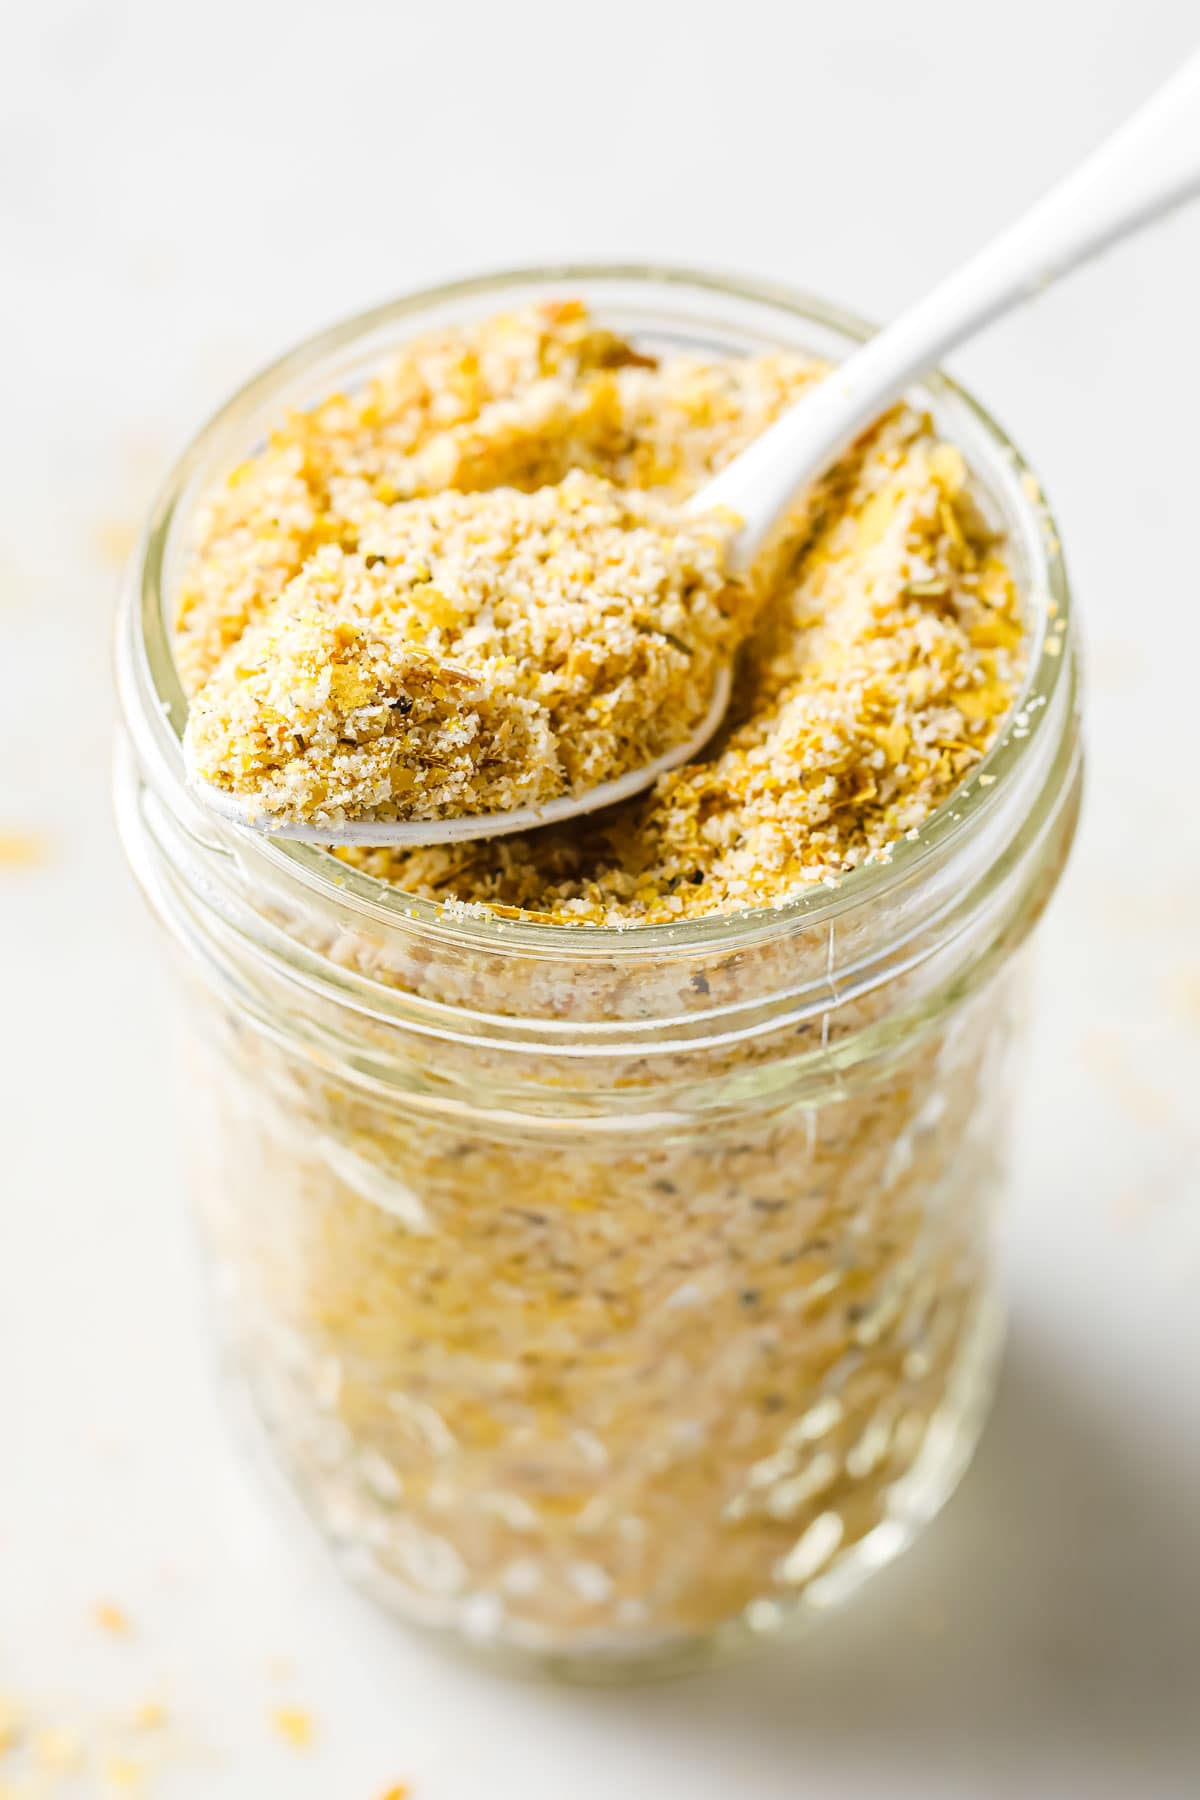 a spoon filled with breadcrumbs on top of a glass jar